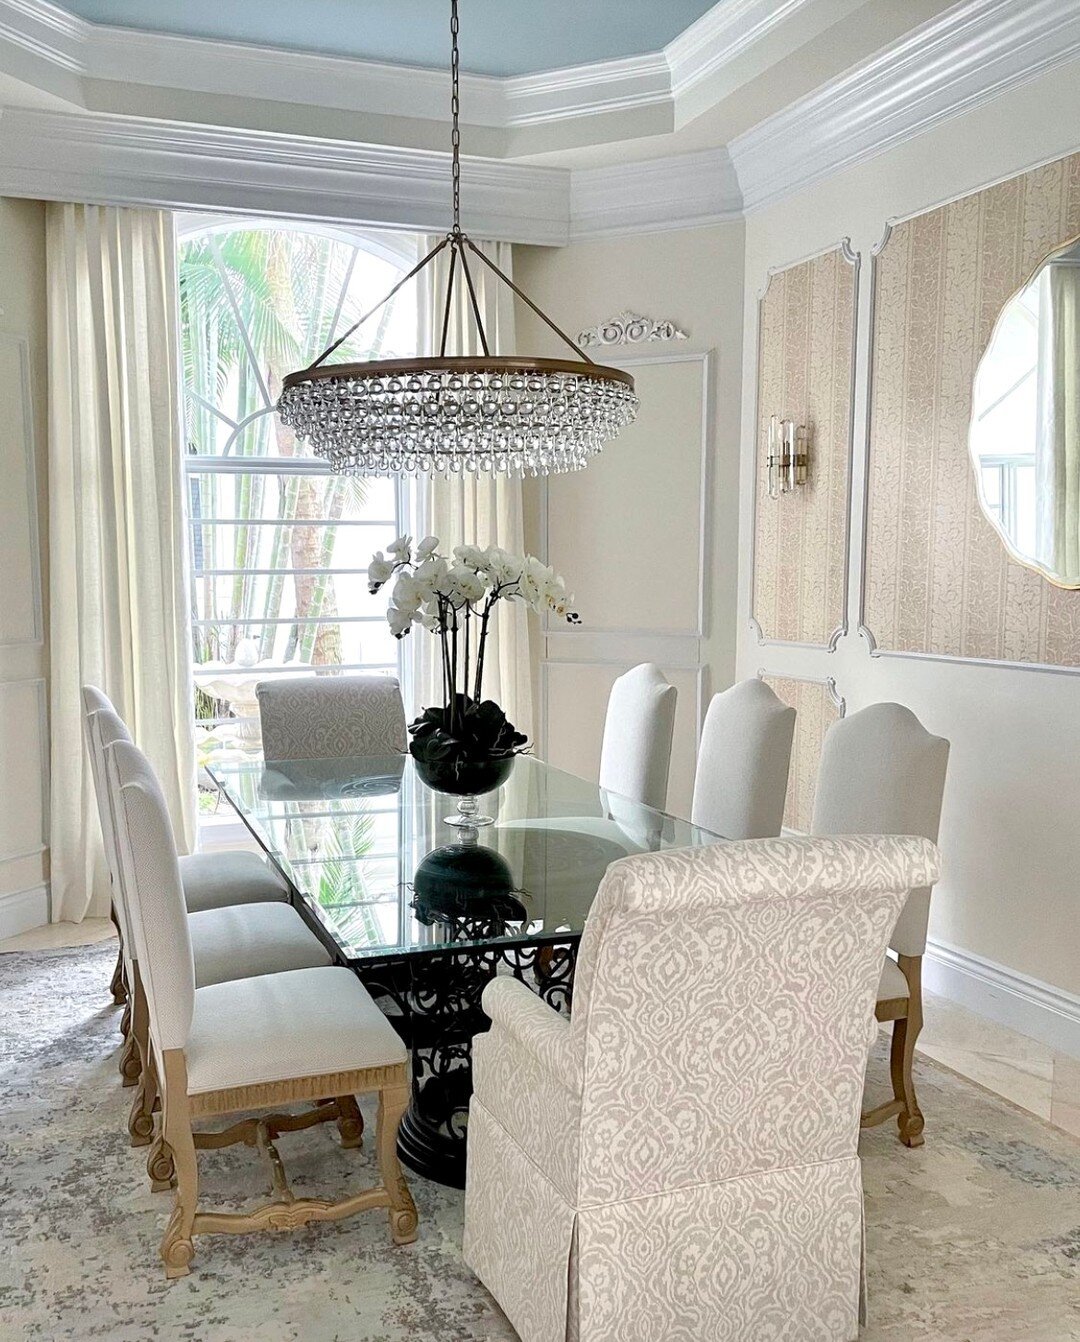 Who doesn't love a good before and after?
From dim to dazzling, we love this dining room redesign from reupholstered chairs to glamorous lighting. 😉

Design: @sandraasdourianinteriors
Light: Calypso Chandelier
Check out our Link in Bio for lighting 